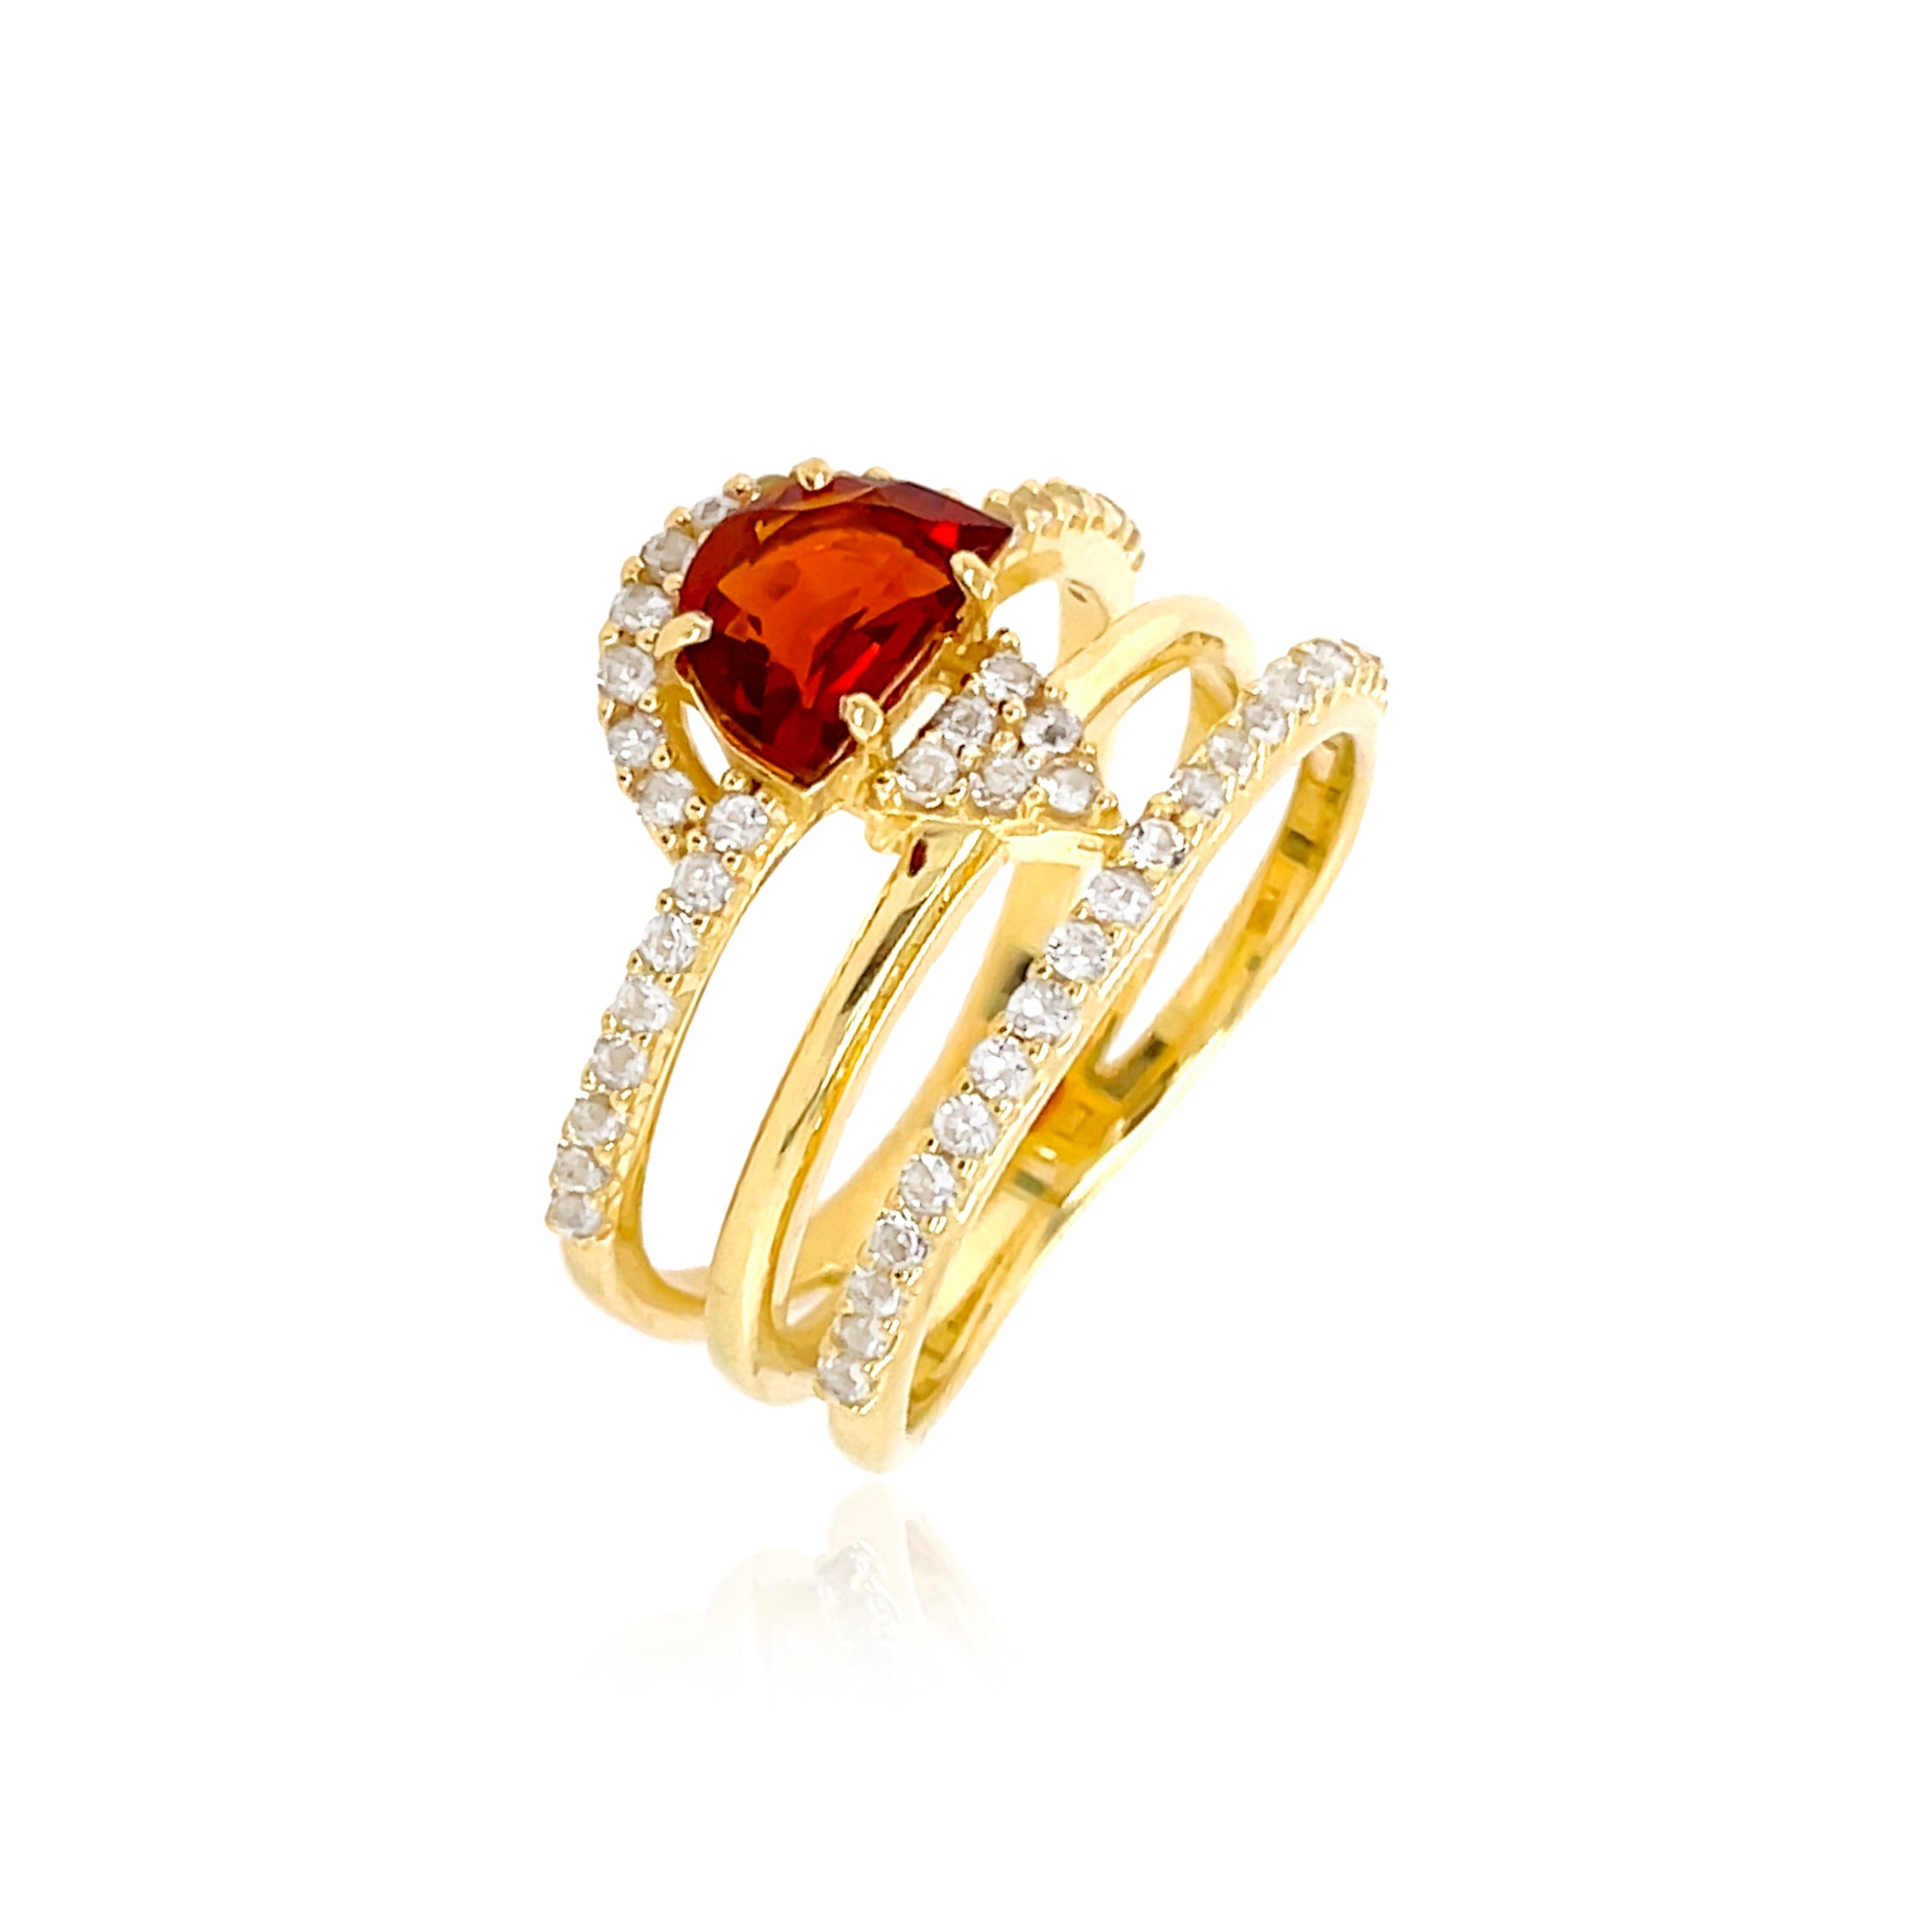 From our Brazilian collection  Round diamonds & garnet stone.  Three row ring   8.00 mm wide  18k yellow gold